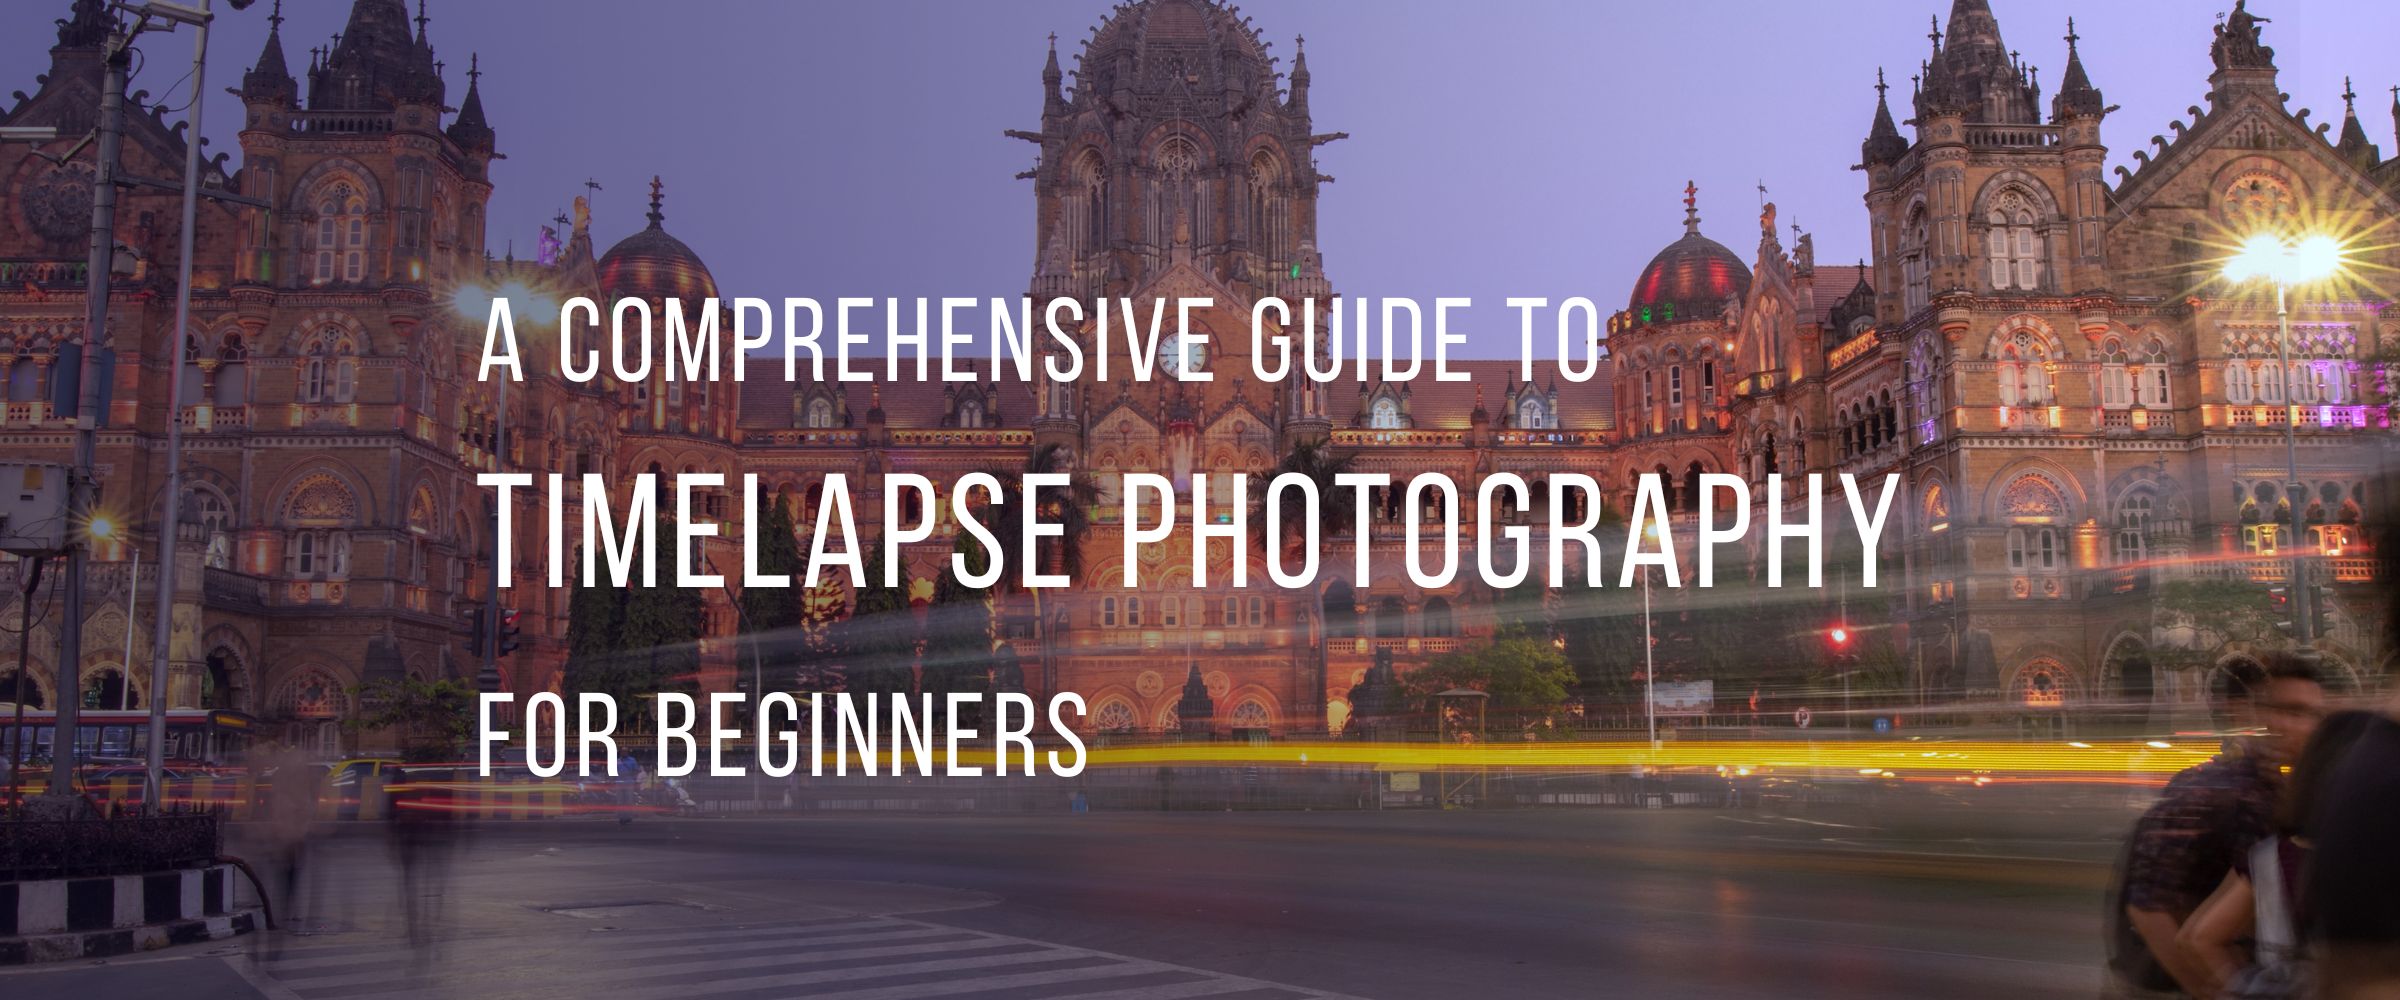 A Comprehensive Guide to Timelapse Photography for Beginners